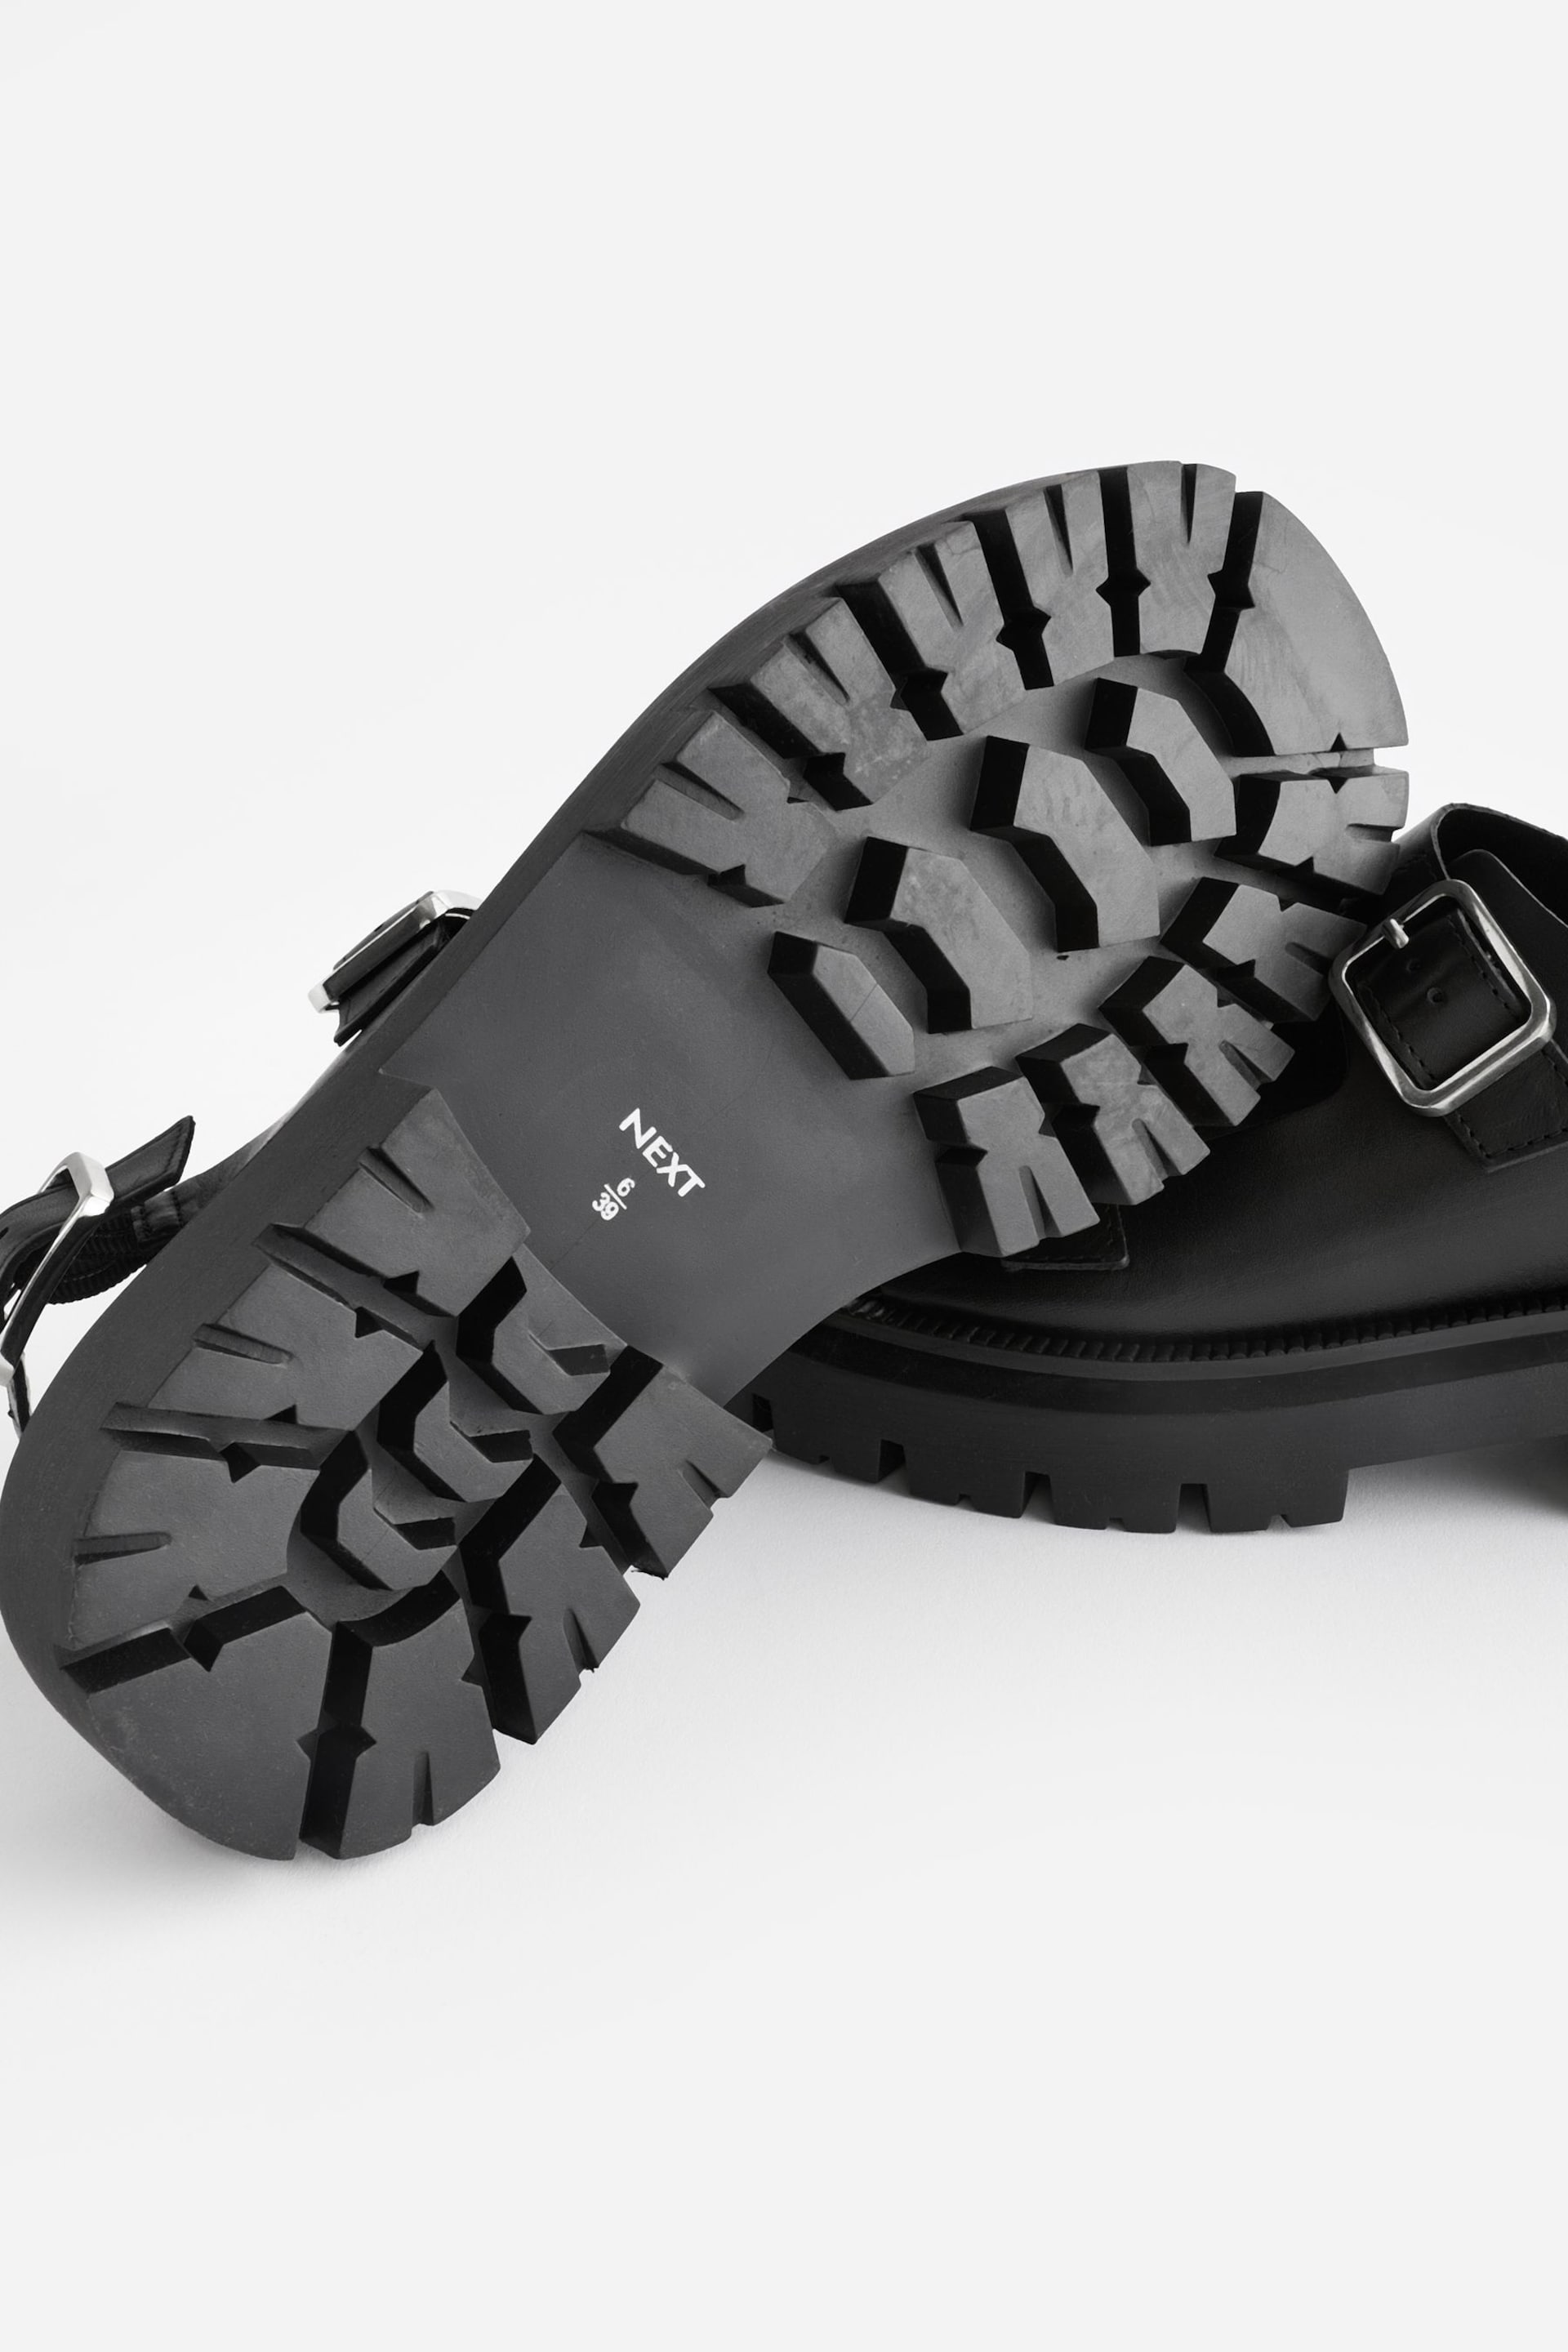 Black Regular/Wide Fit Premium Leather Chunky Cleated Sandals - Image 8 of 8